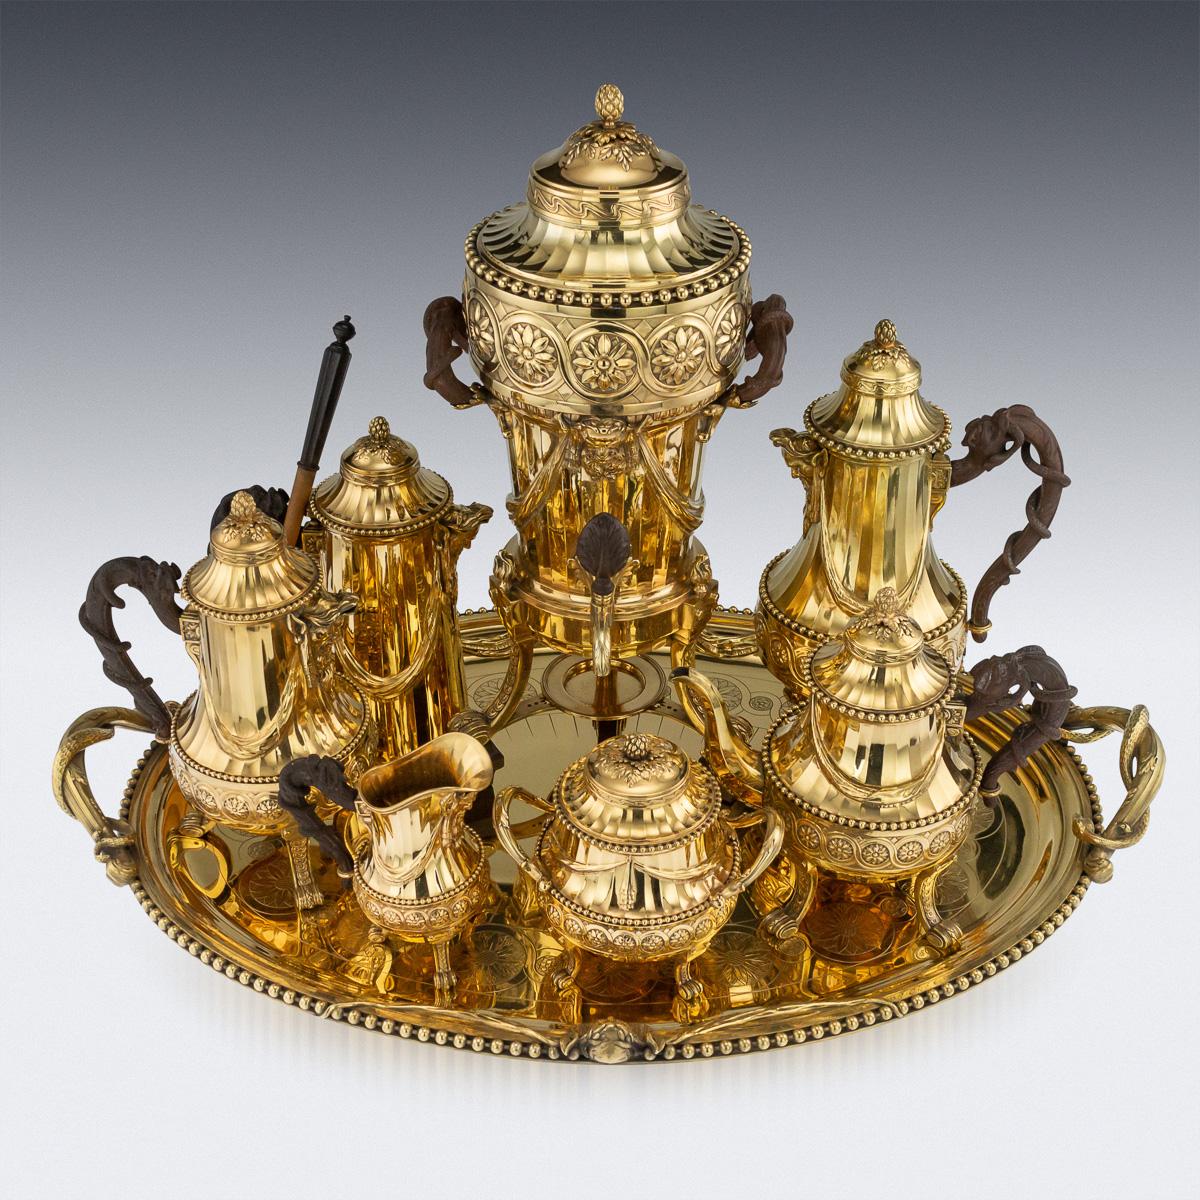 Antique 19th century exceptional French Louis XVI style silver-gilt monumental tea service, comprising of a silver plated kettle on stand and silver plated plated tray, all other pieces are solid silver; hot water kettle, chocolate pot with a wood